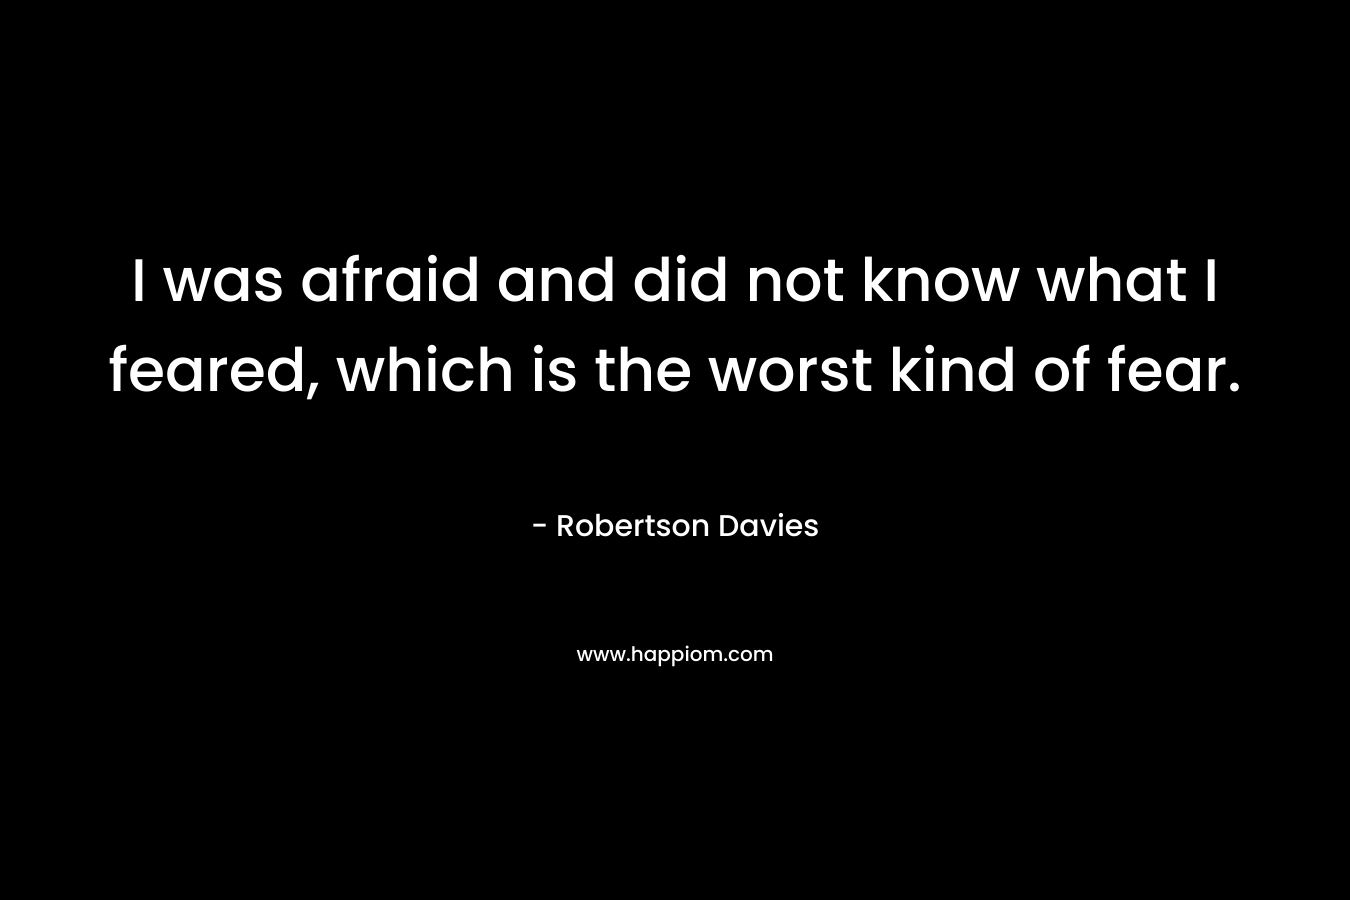 I was afraid and did not know what I feared, which is the worst kind of fear.